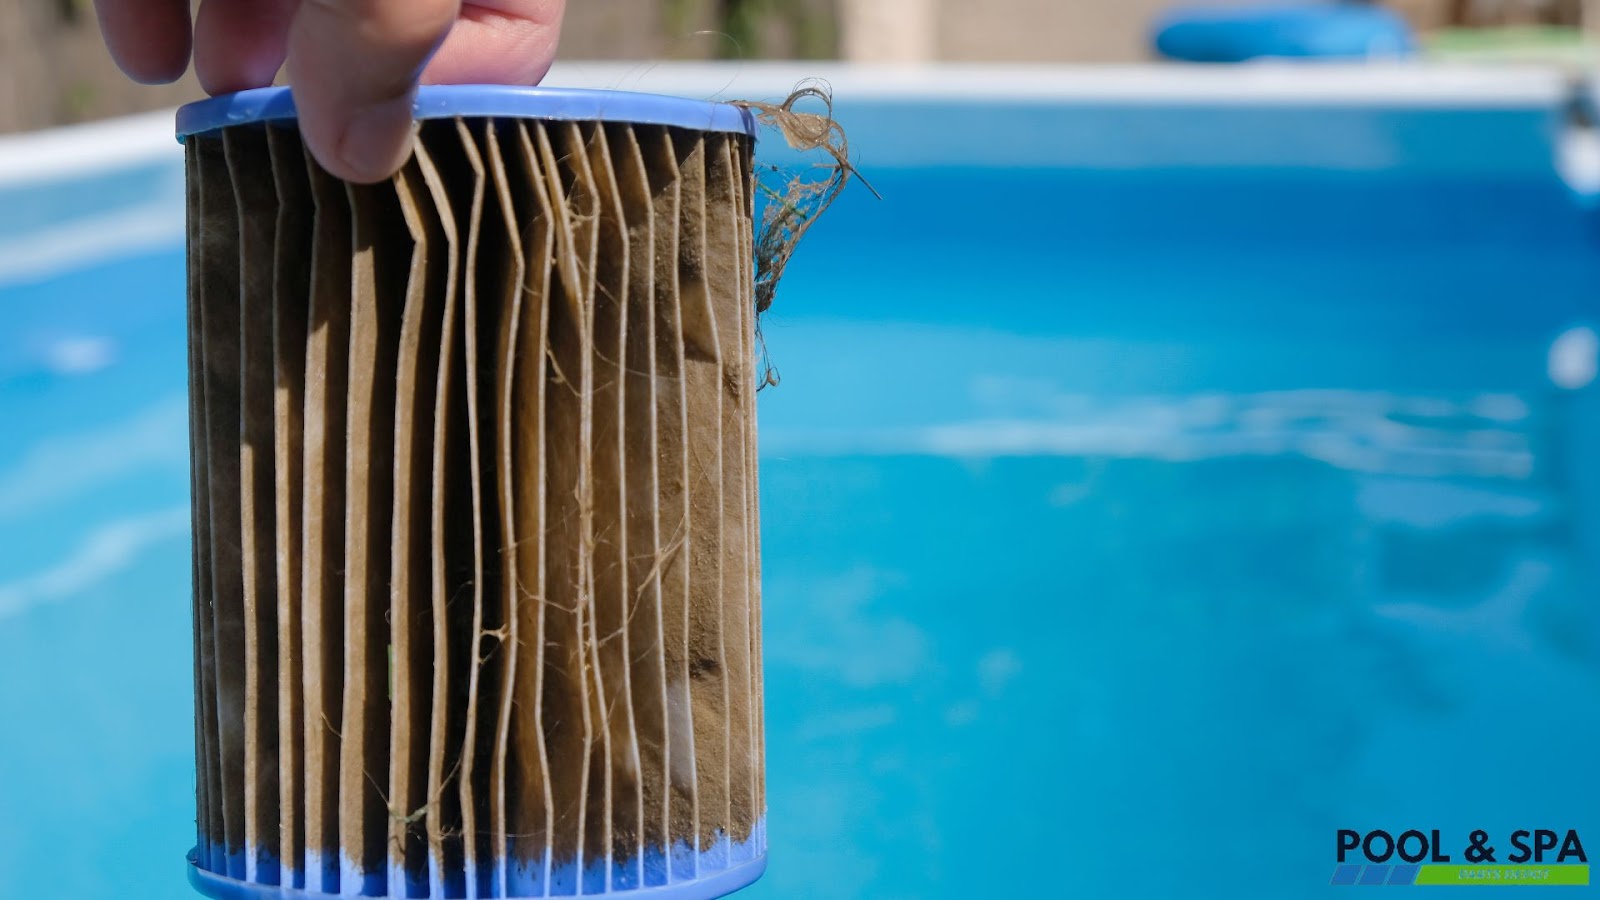 Cleaning of Cartridge Filter